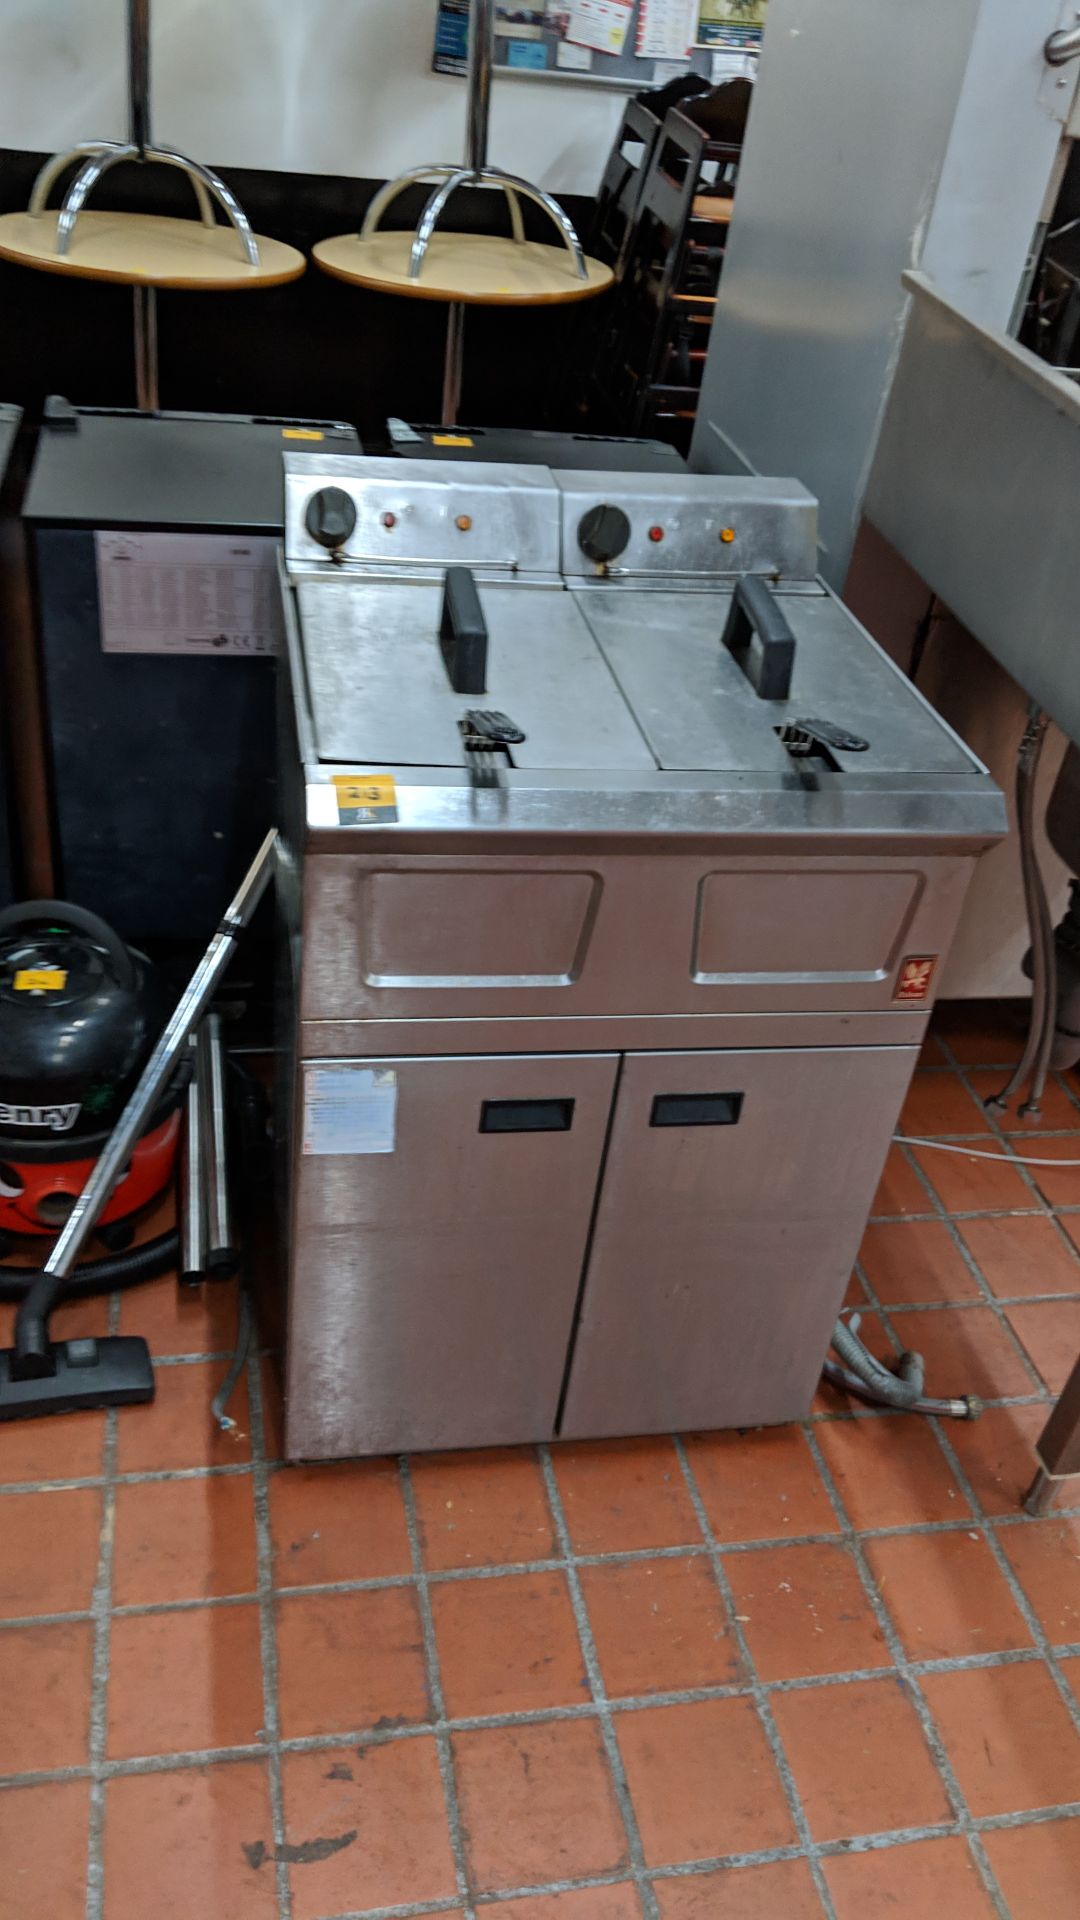 Falcon floorstanding stainless steel twin deep fat fryer Lots 80 - 95 & 168 - 249 consist of café - Image 8 of 8